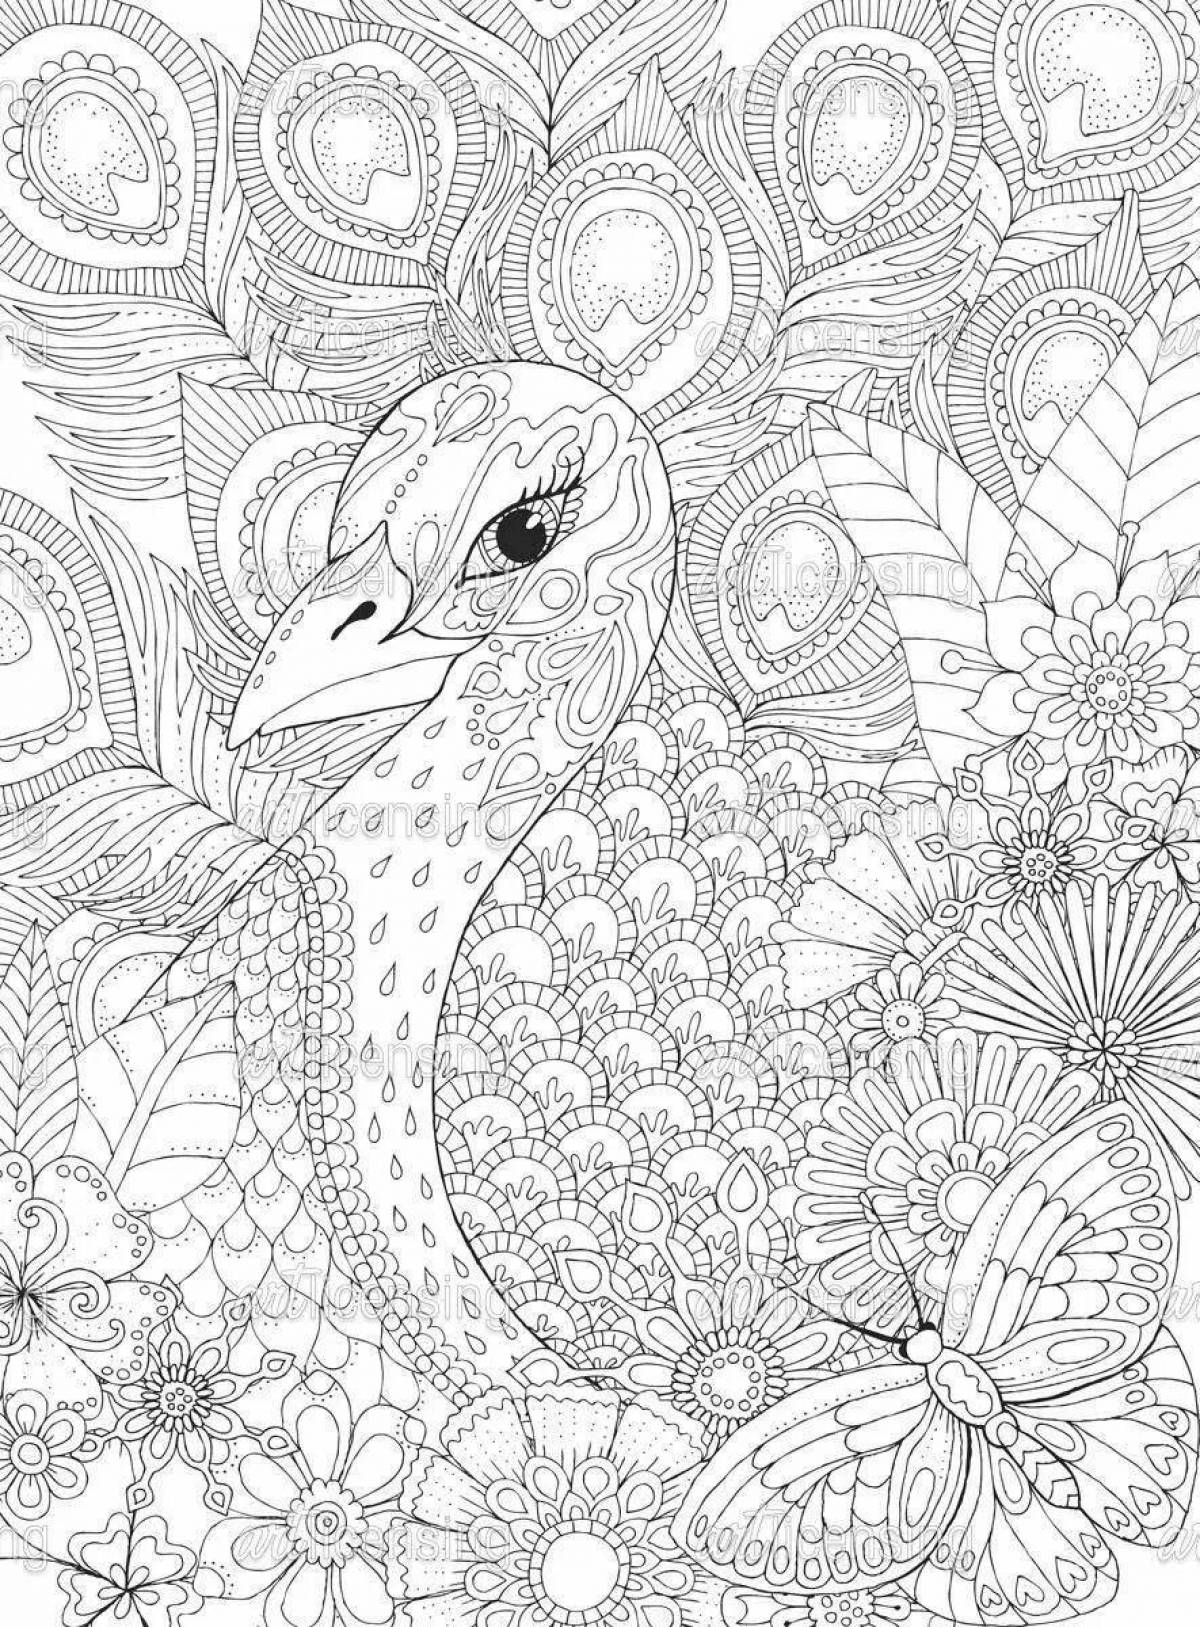 Great coloring art page